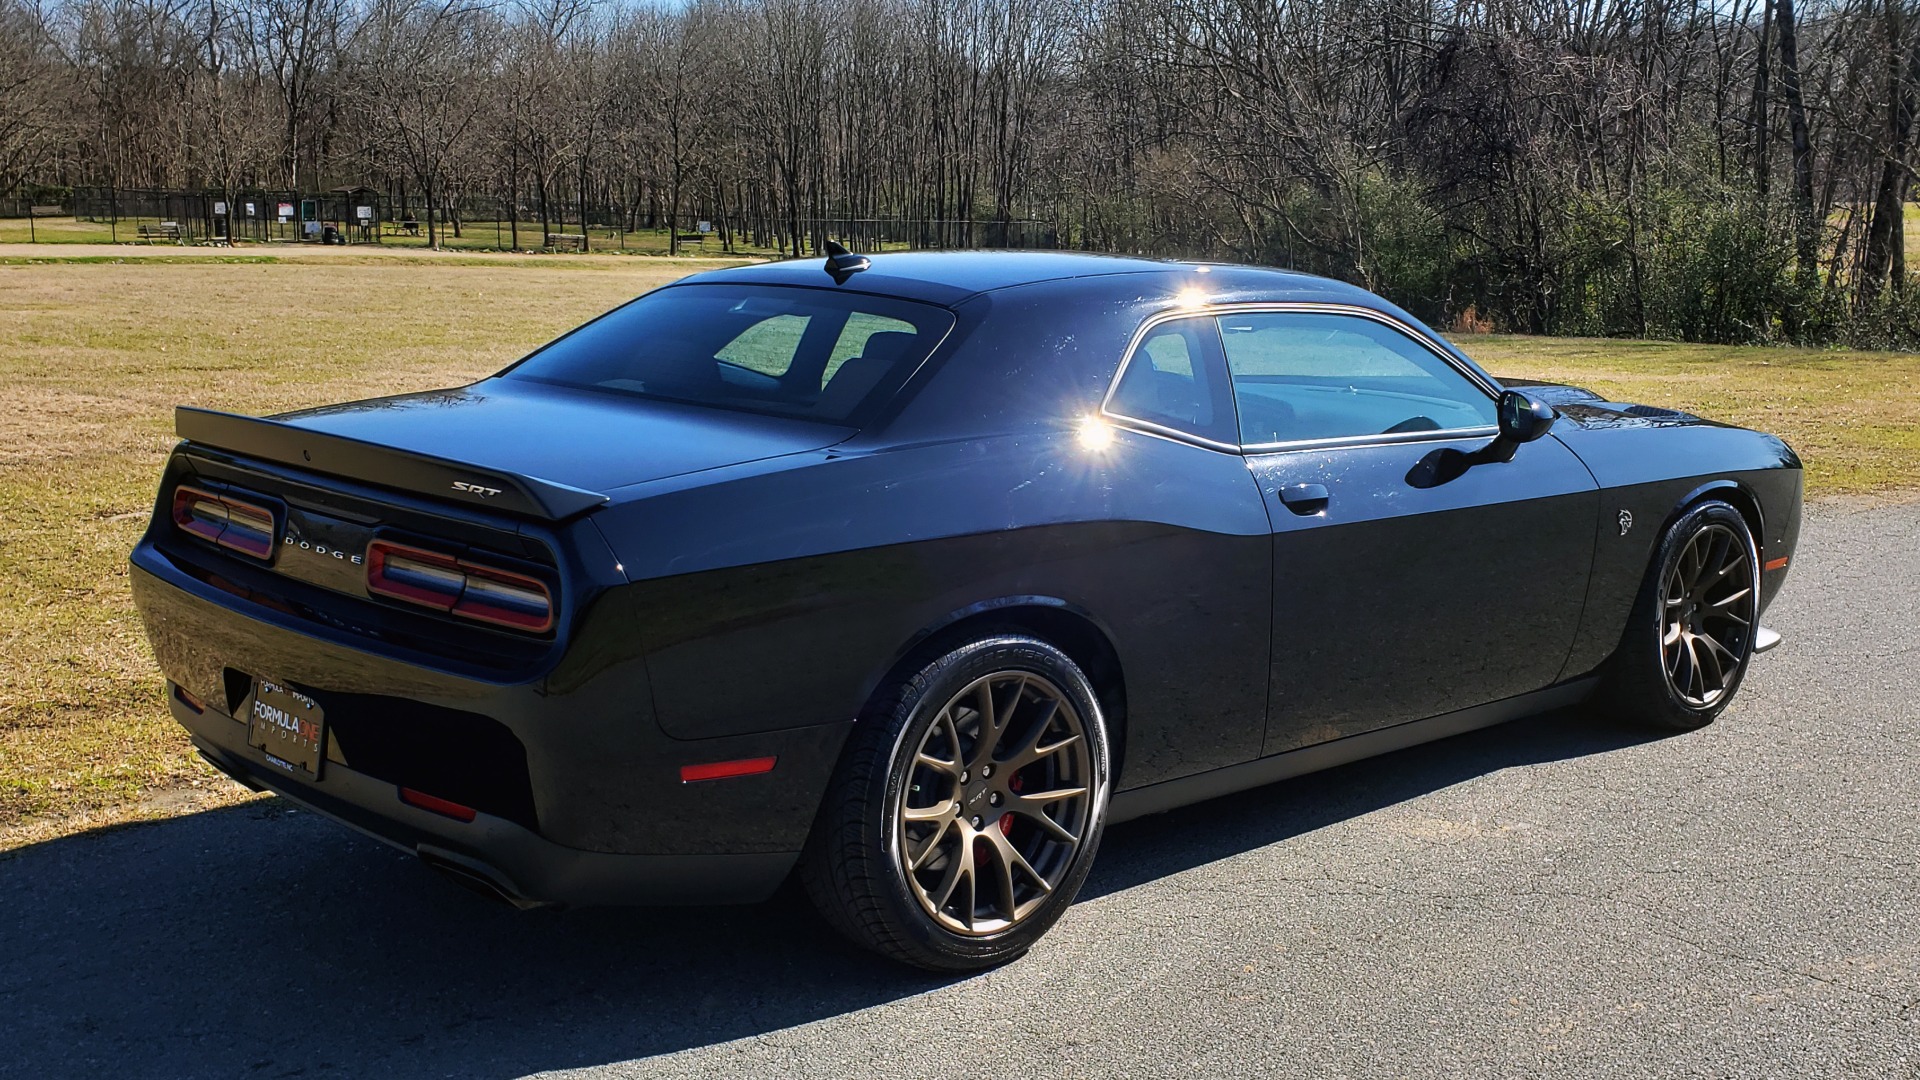 Used 2016 Dodge CHALLENGER SRT HELLCAT / NAV / SUNROOF / REARVIEW / BRASS MONKEY for sale Sold at Formula Imports in Charlotte NC 28227 17